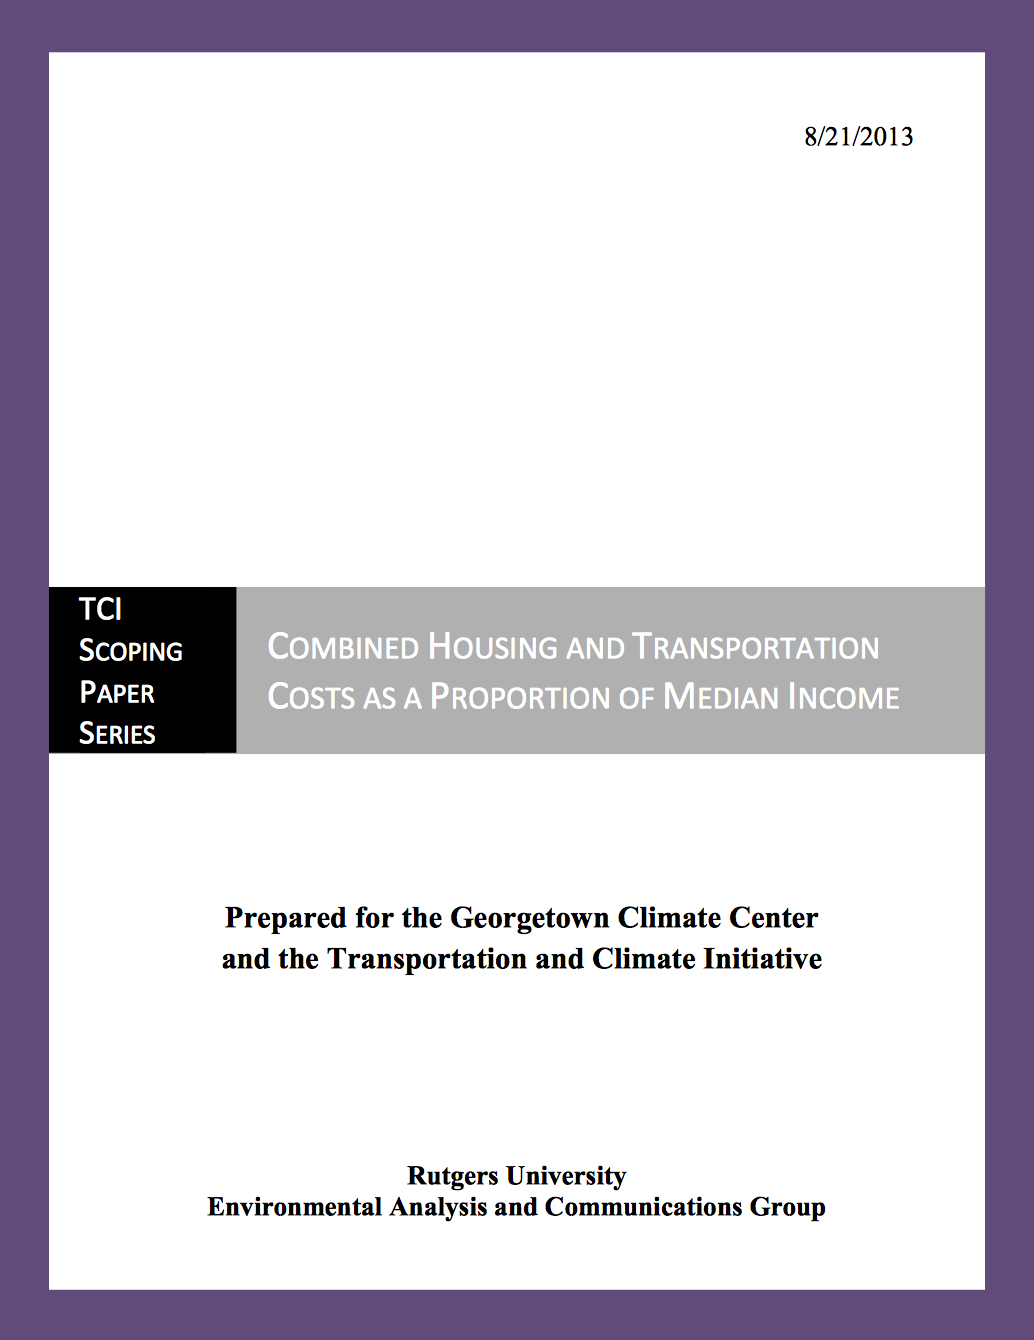 Sustainable Communities Indicators Research Paper Series: Housing and Transportation Costs